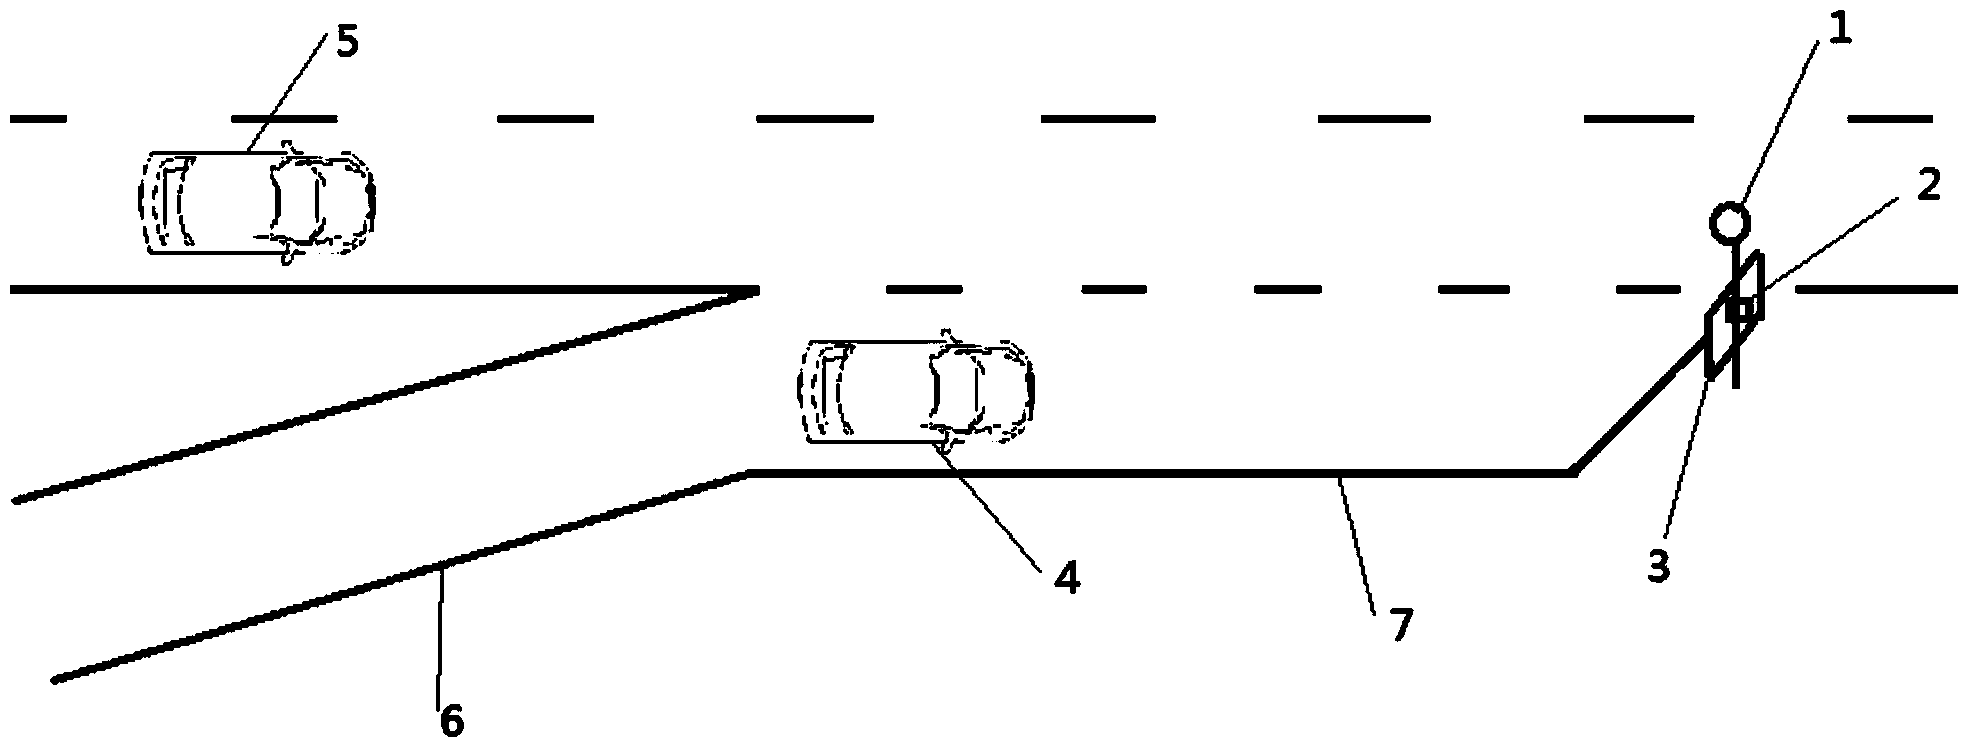 Safety prompt device and prompt method for on-ramp vehicle to merge into main road